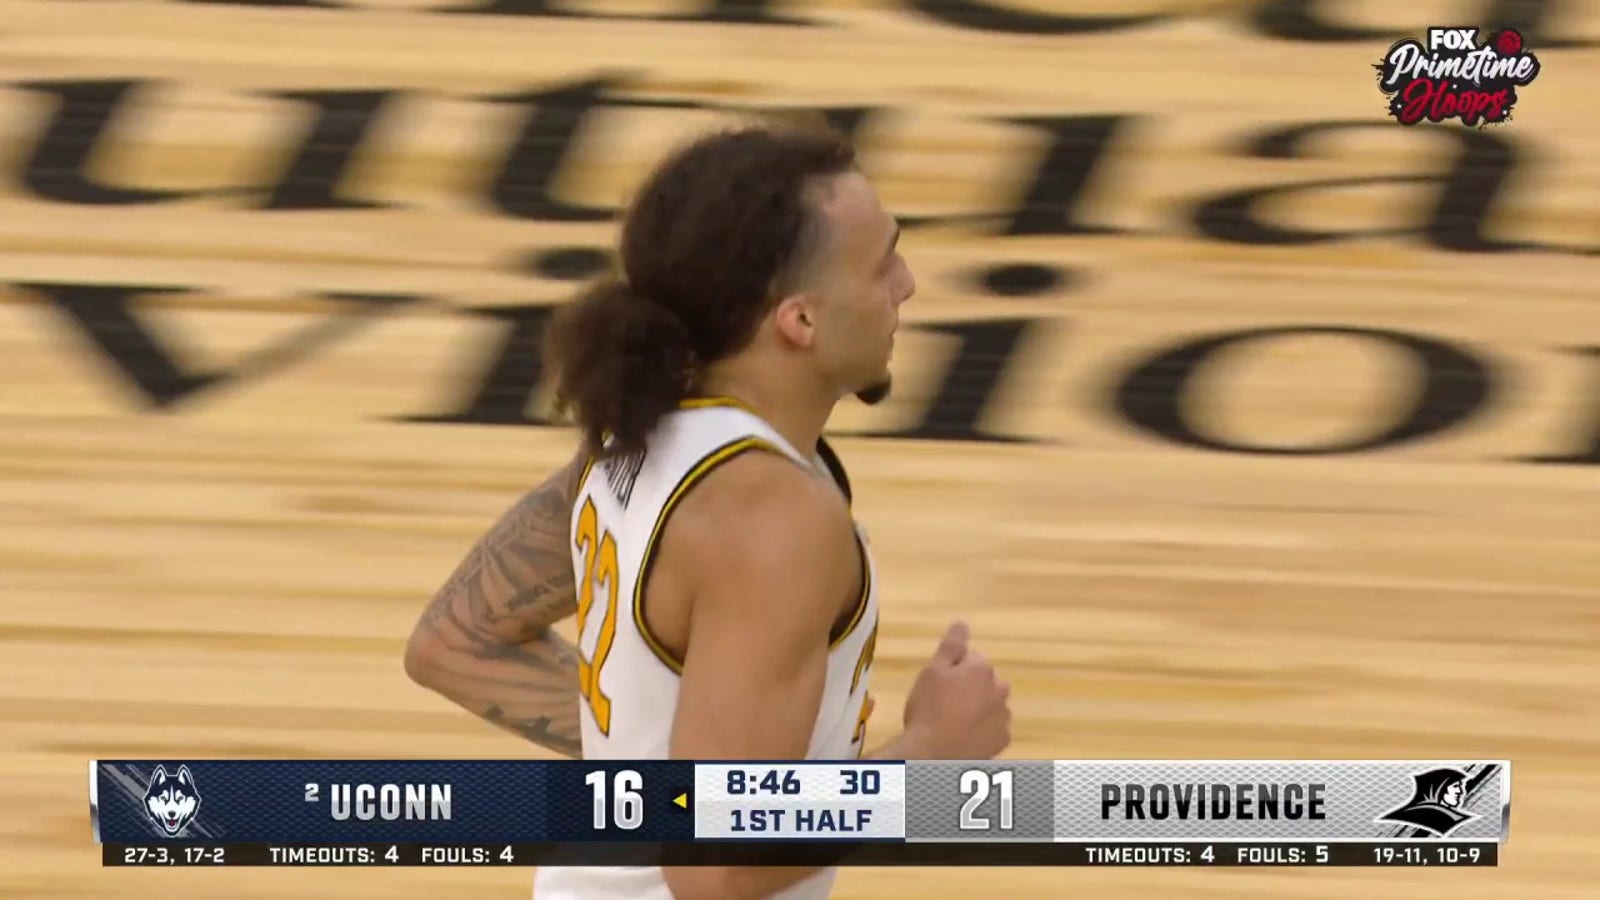 Devin Carter comes up with a big block then slams it at the other end to extend Providence's lead over No. 2 UConn